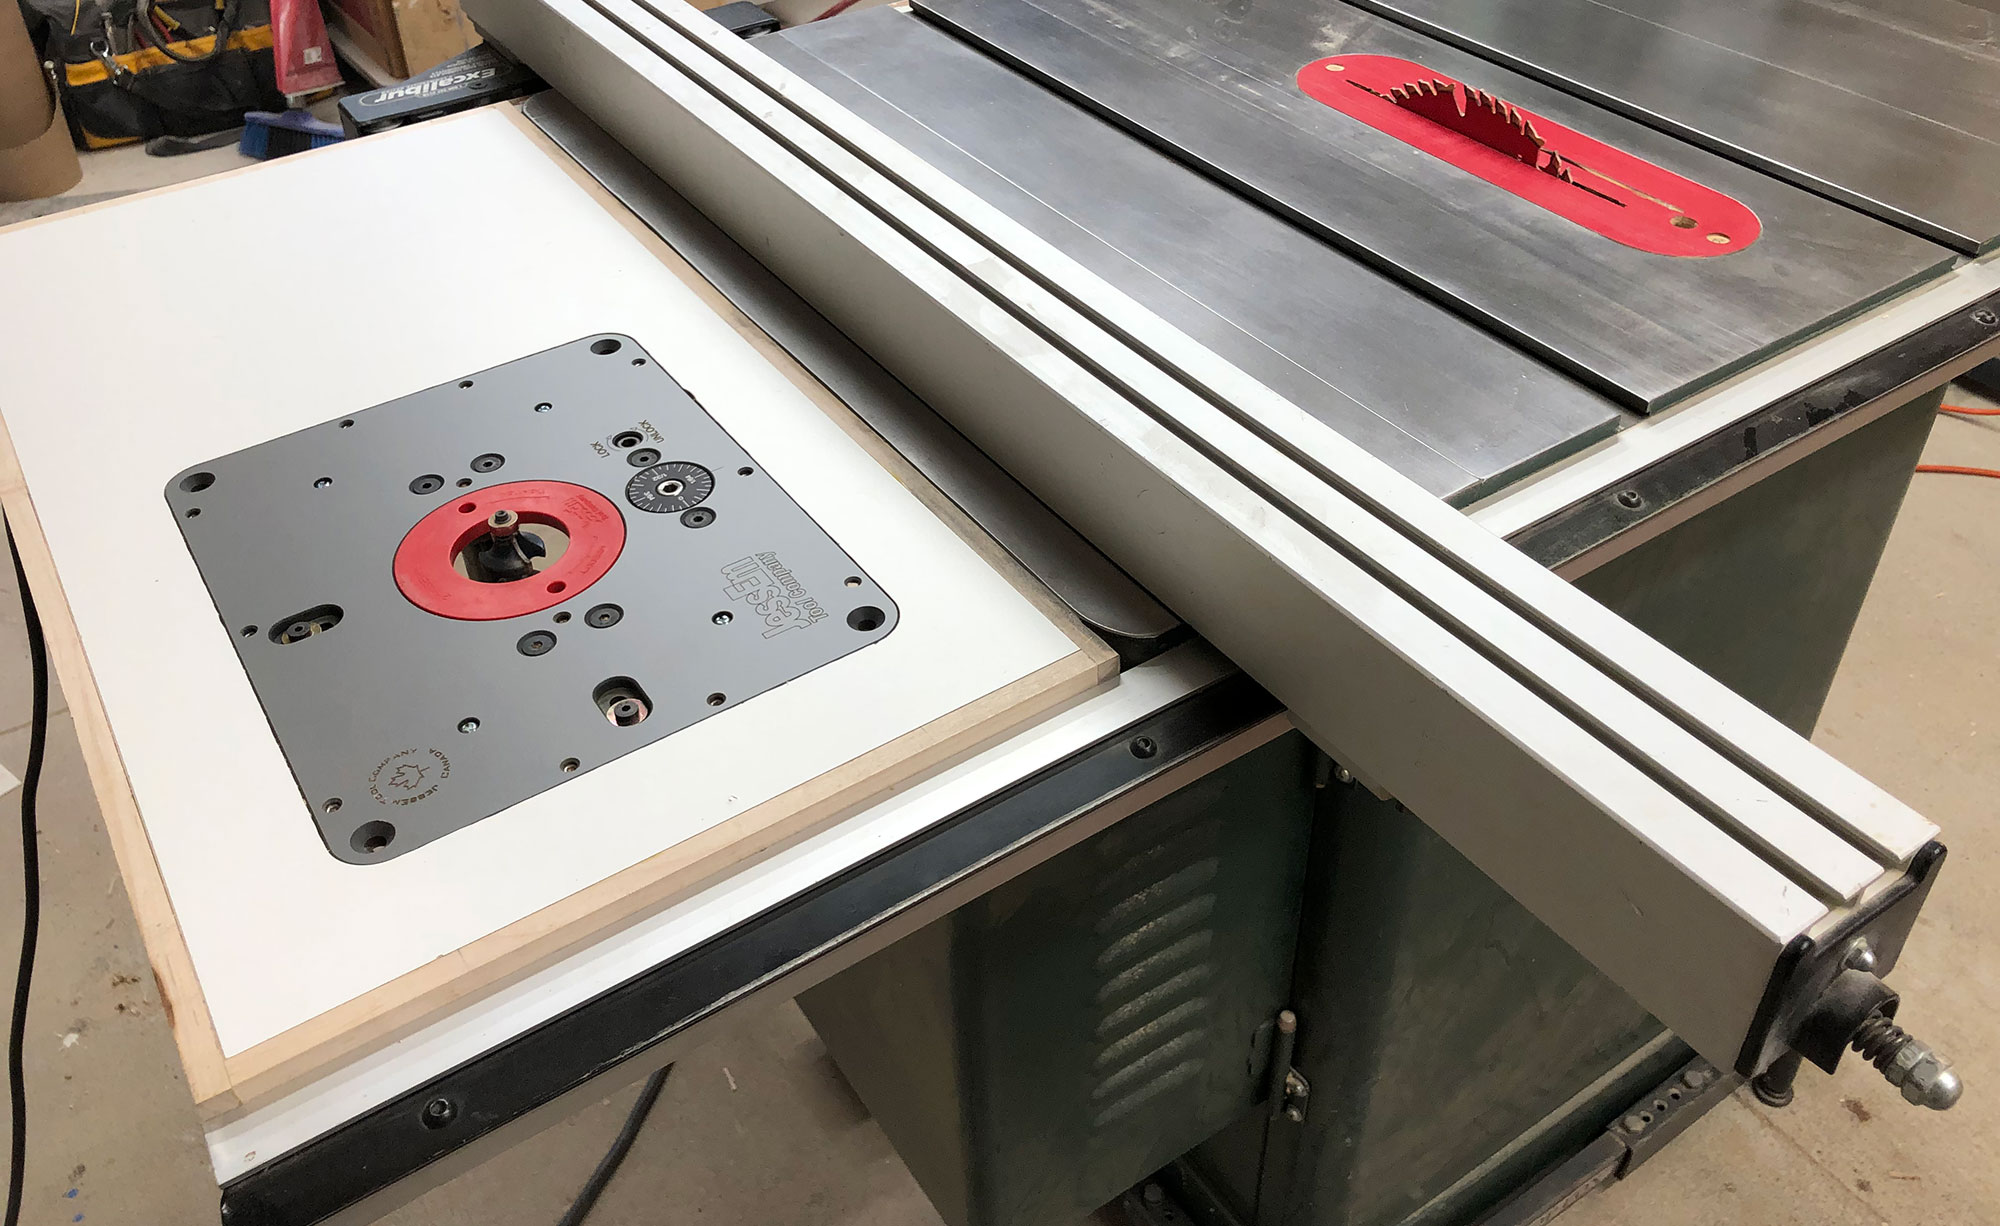 Saw fence serves double duty for both router and table saw